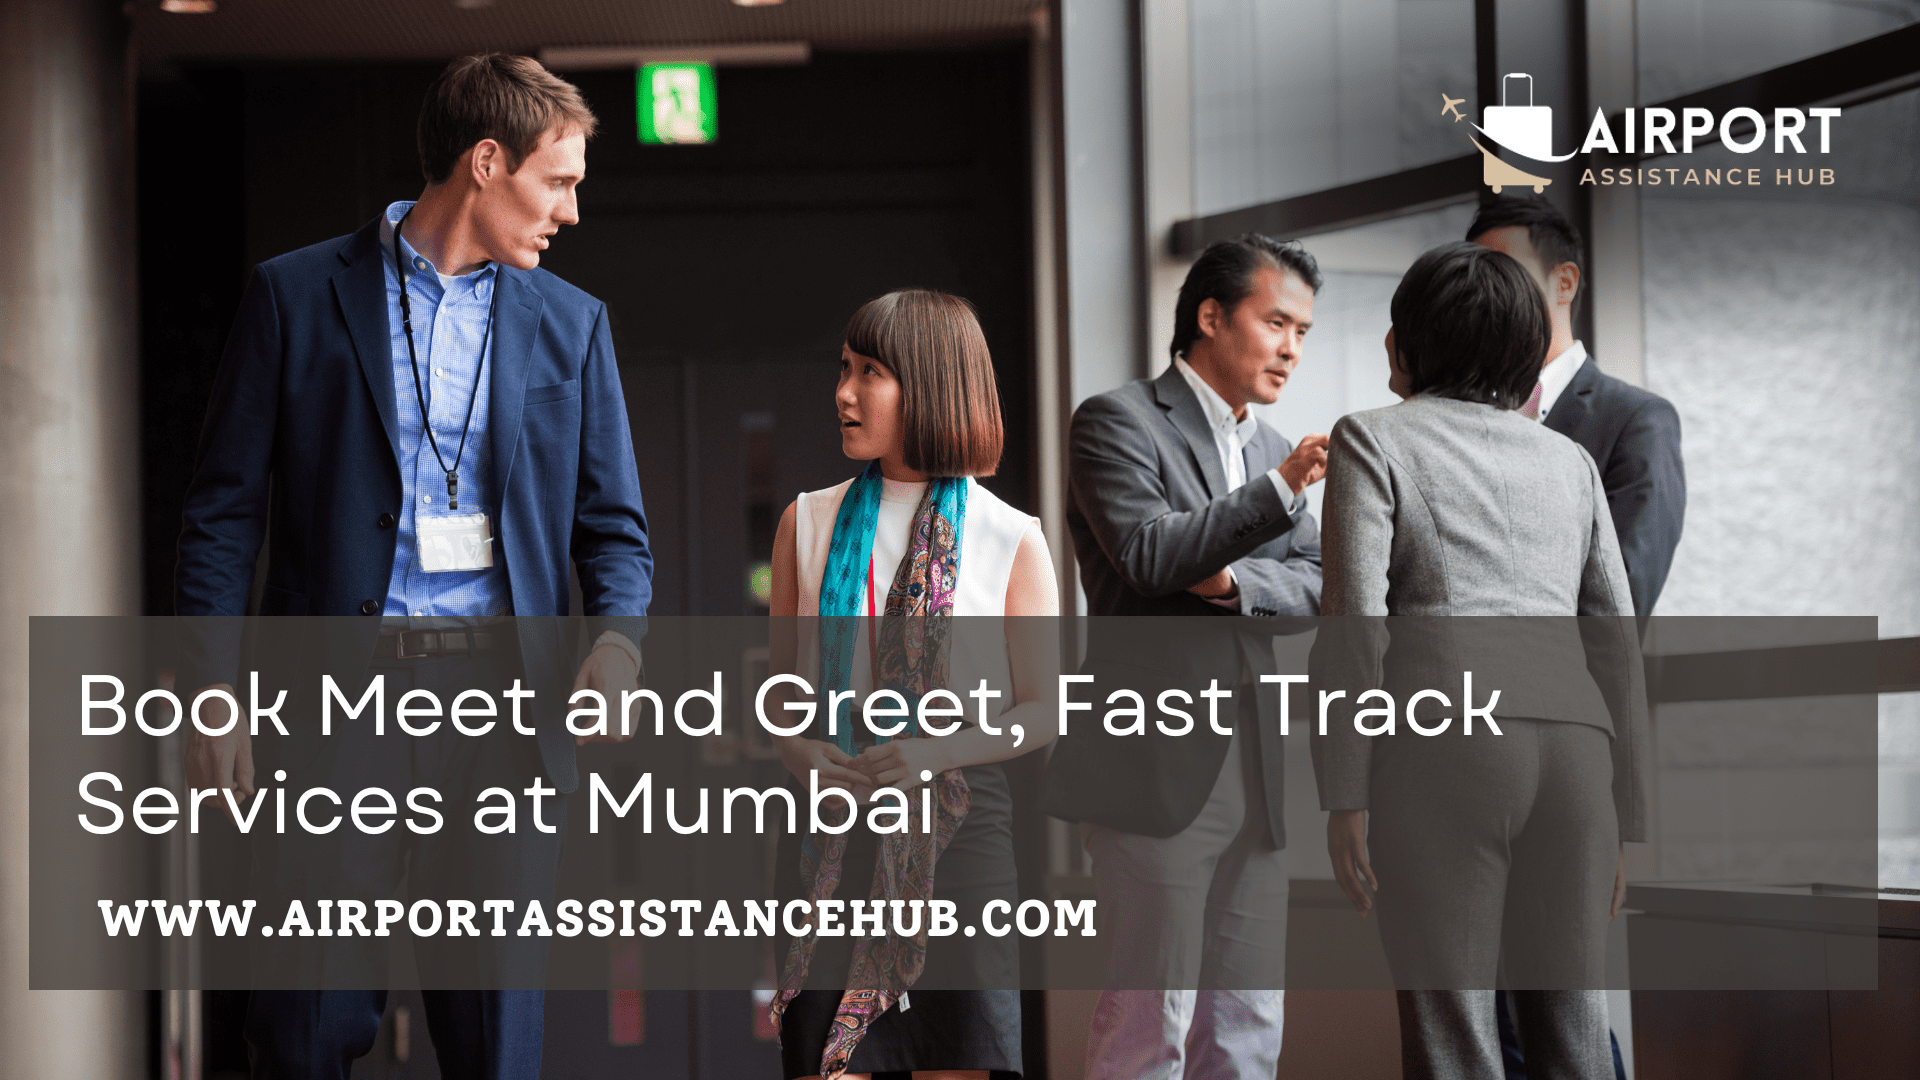 Book Airport Meet and Greet, Fast Track Services at Mumbai